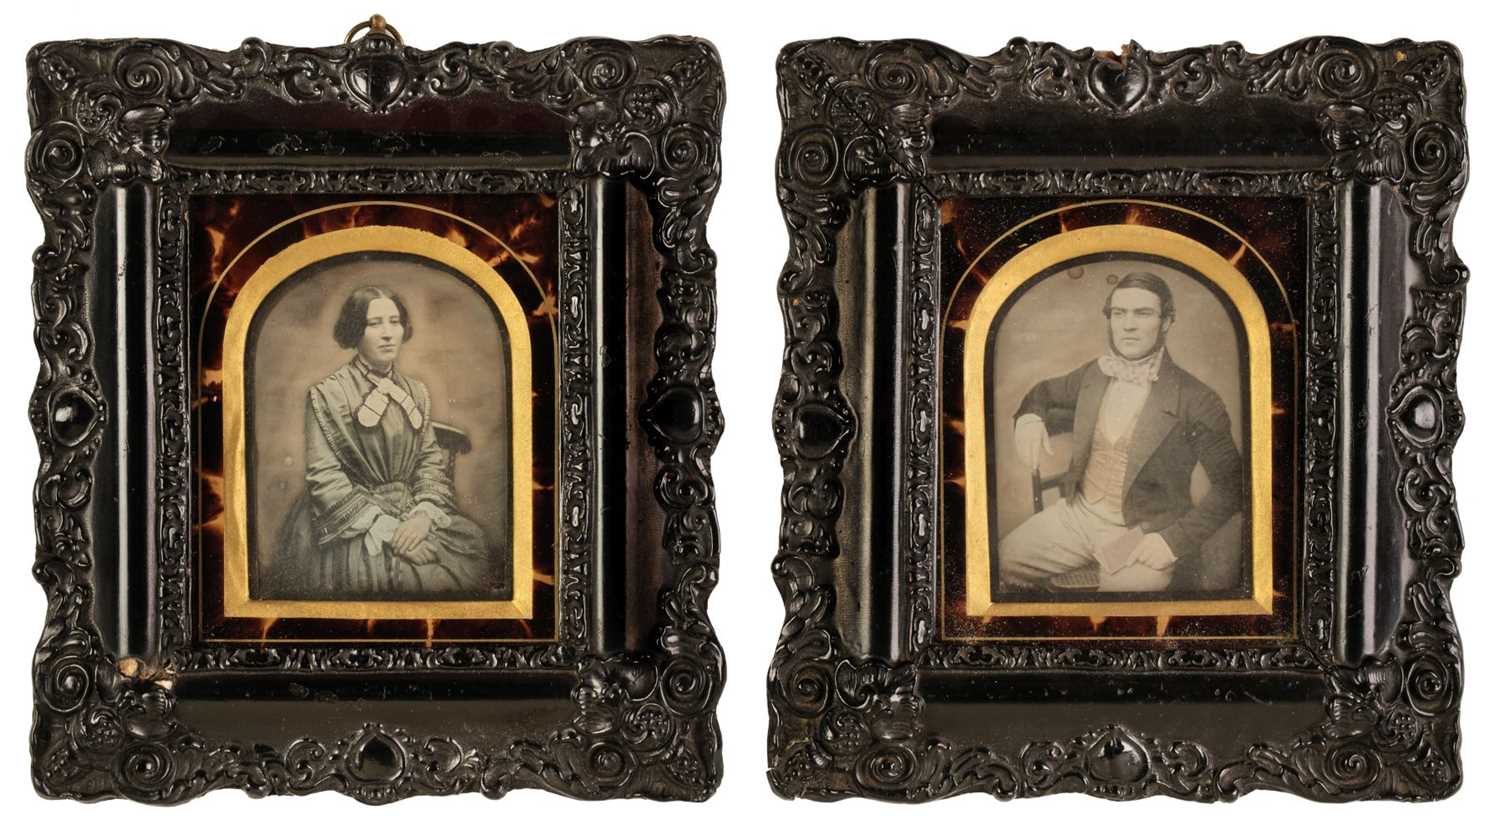 Lot 31 - Daguerreotypes. A pair of hand-tinted daguerreotypes of a seated young woman and young man, c. 1860